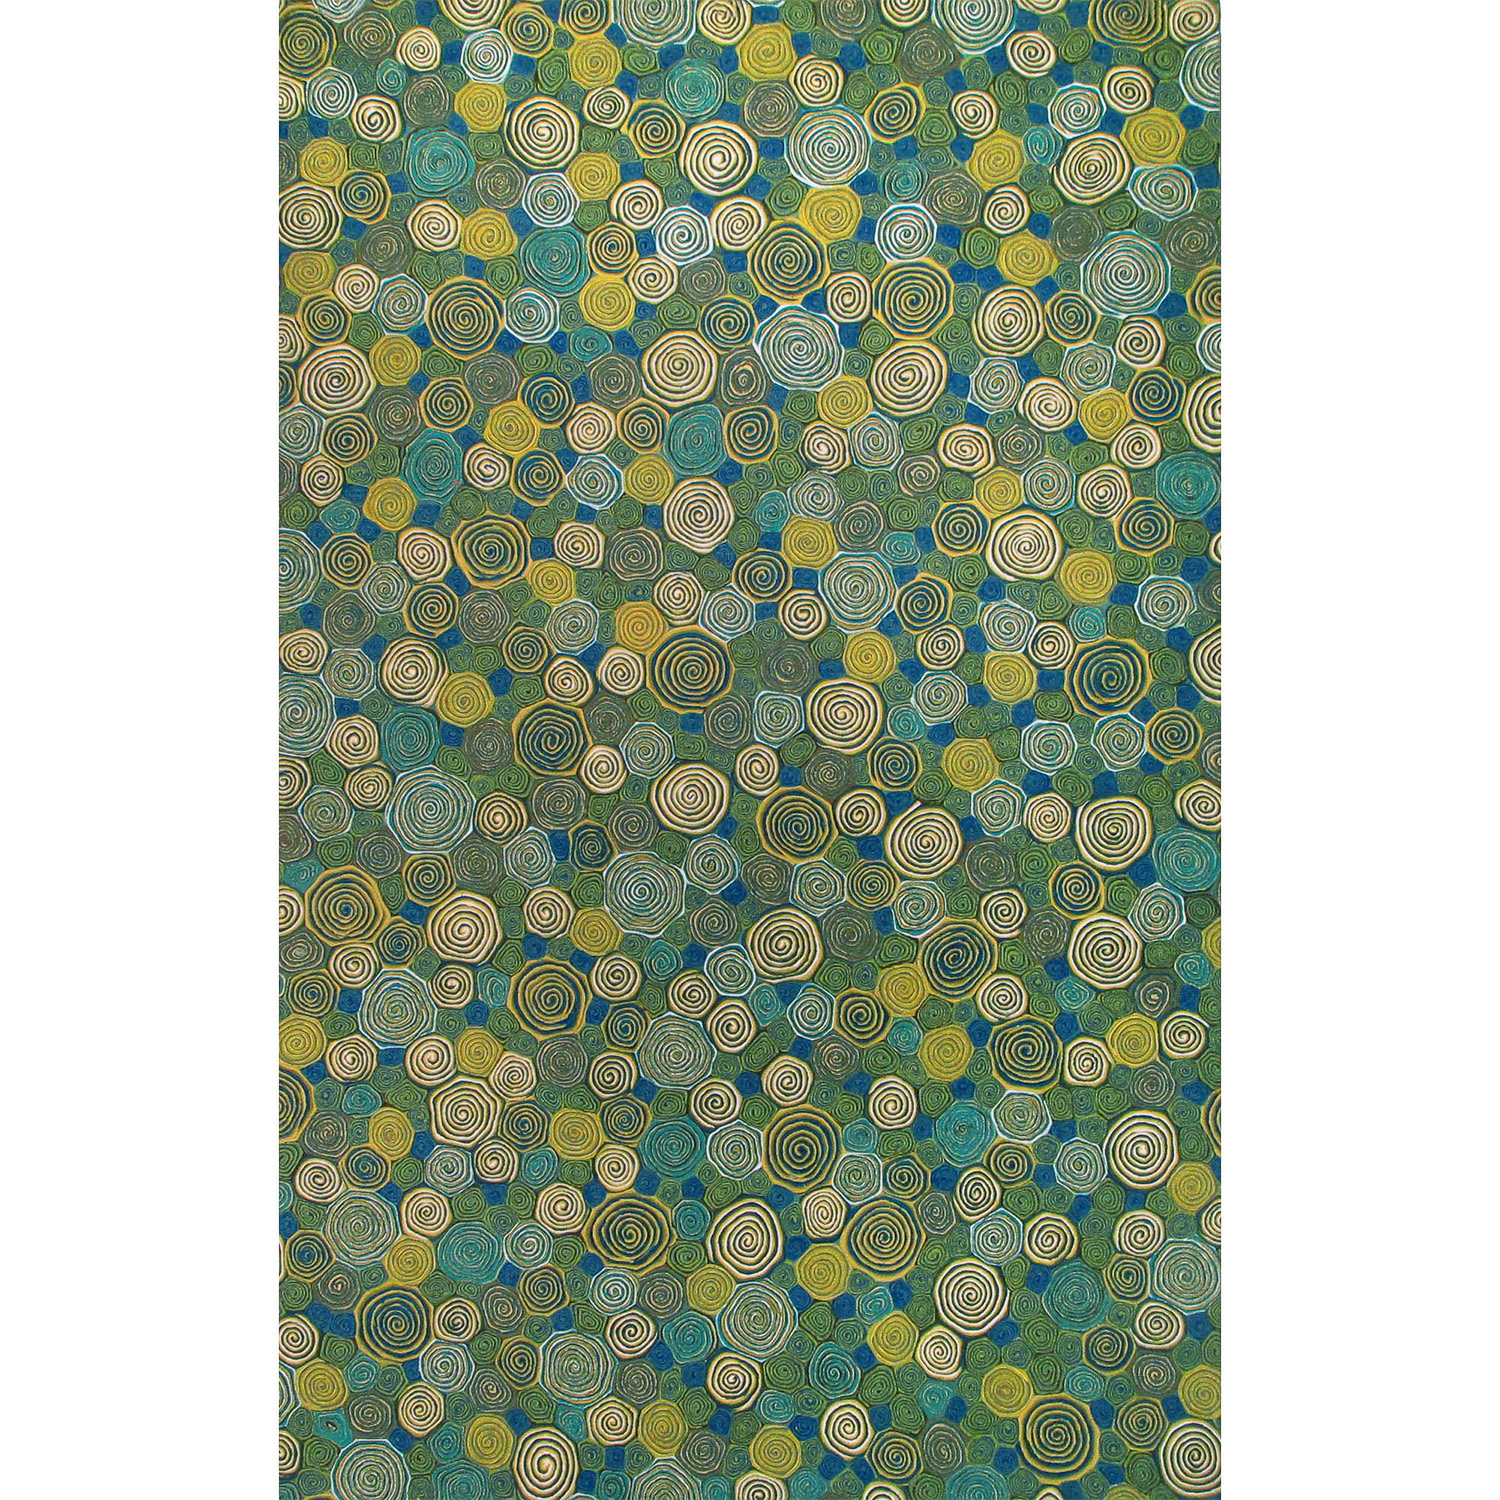 Liora Manne Visions III  Rug-Abstract, Giant Swirls Marina  Product Image